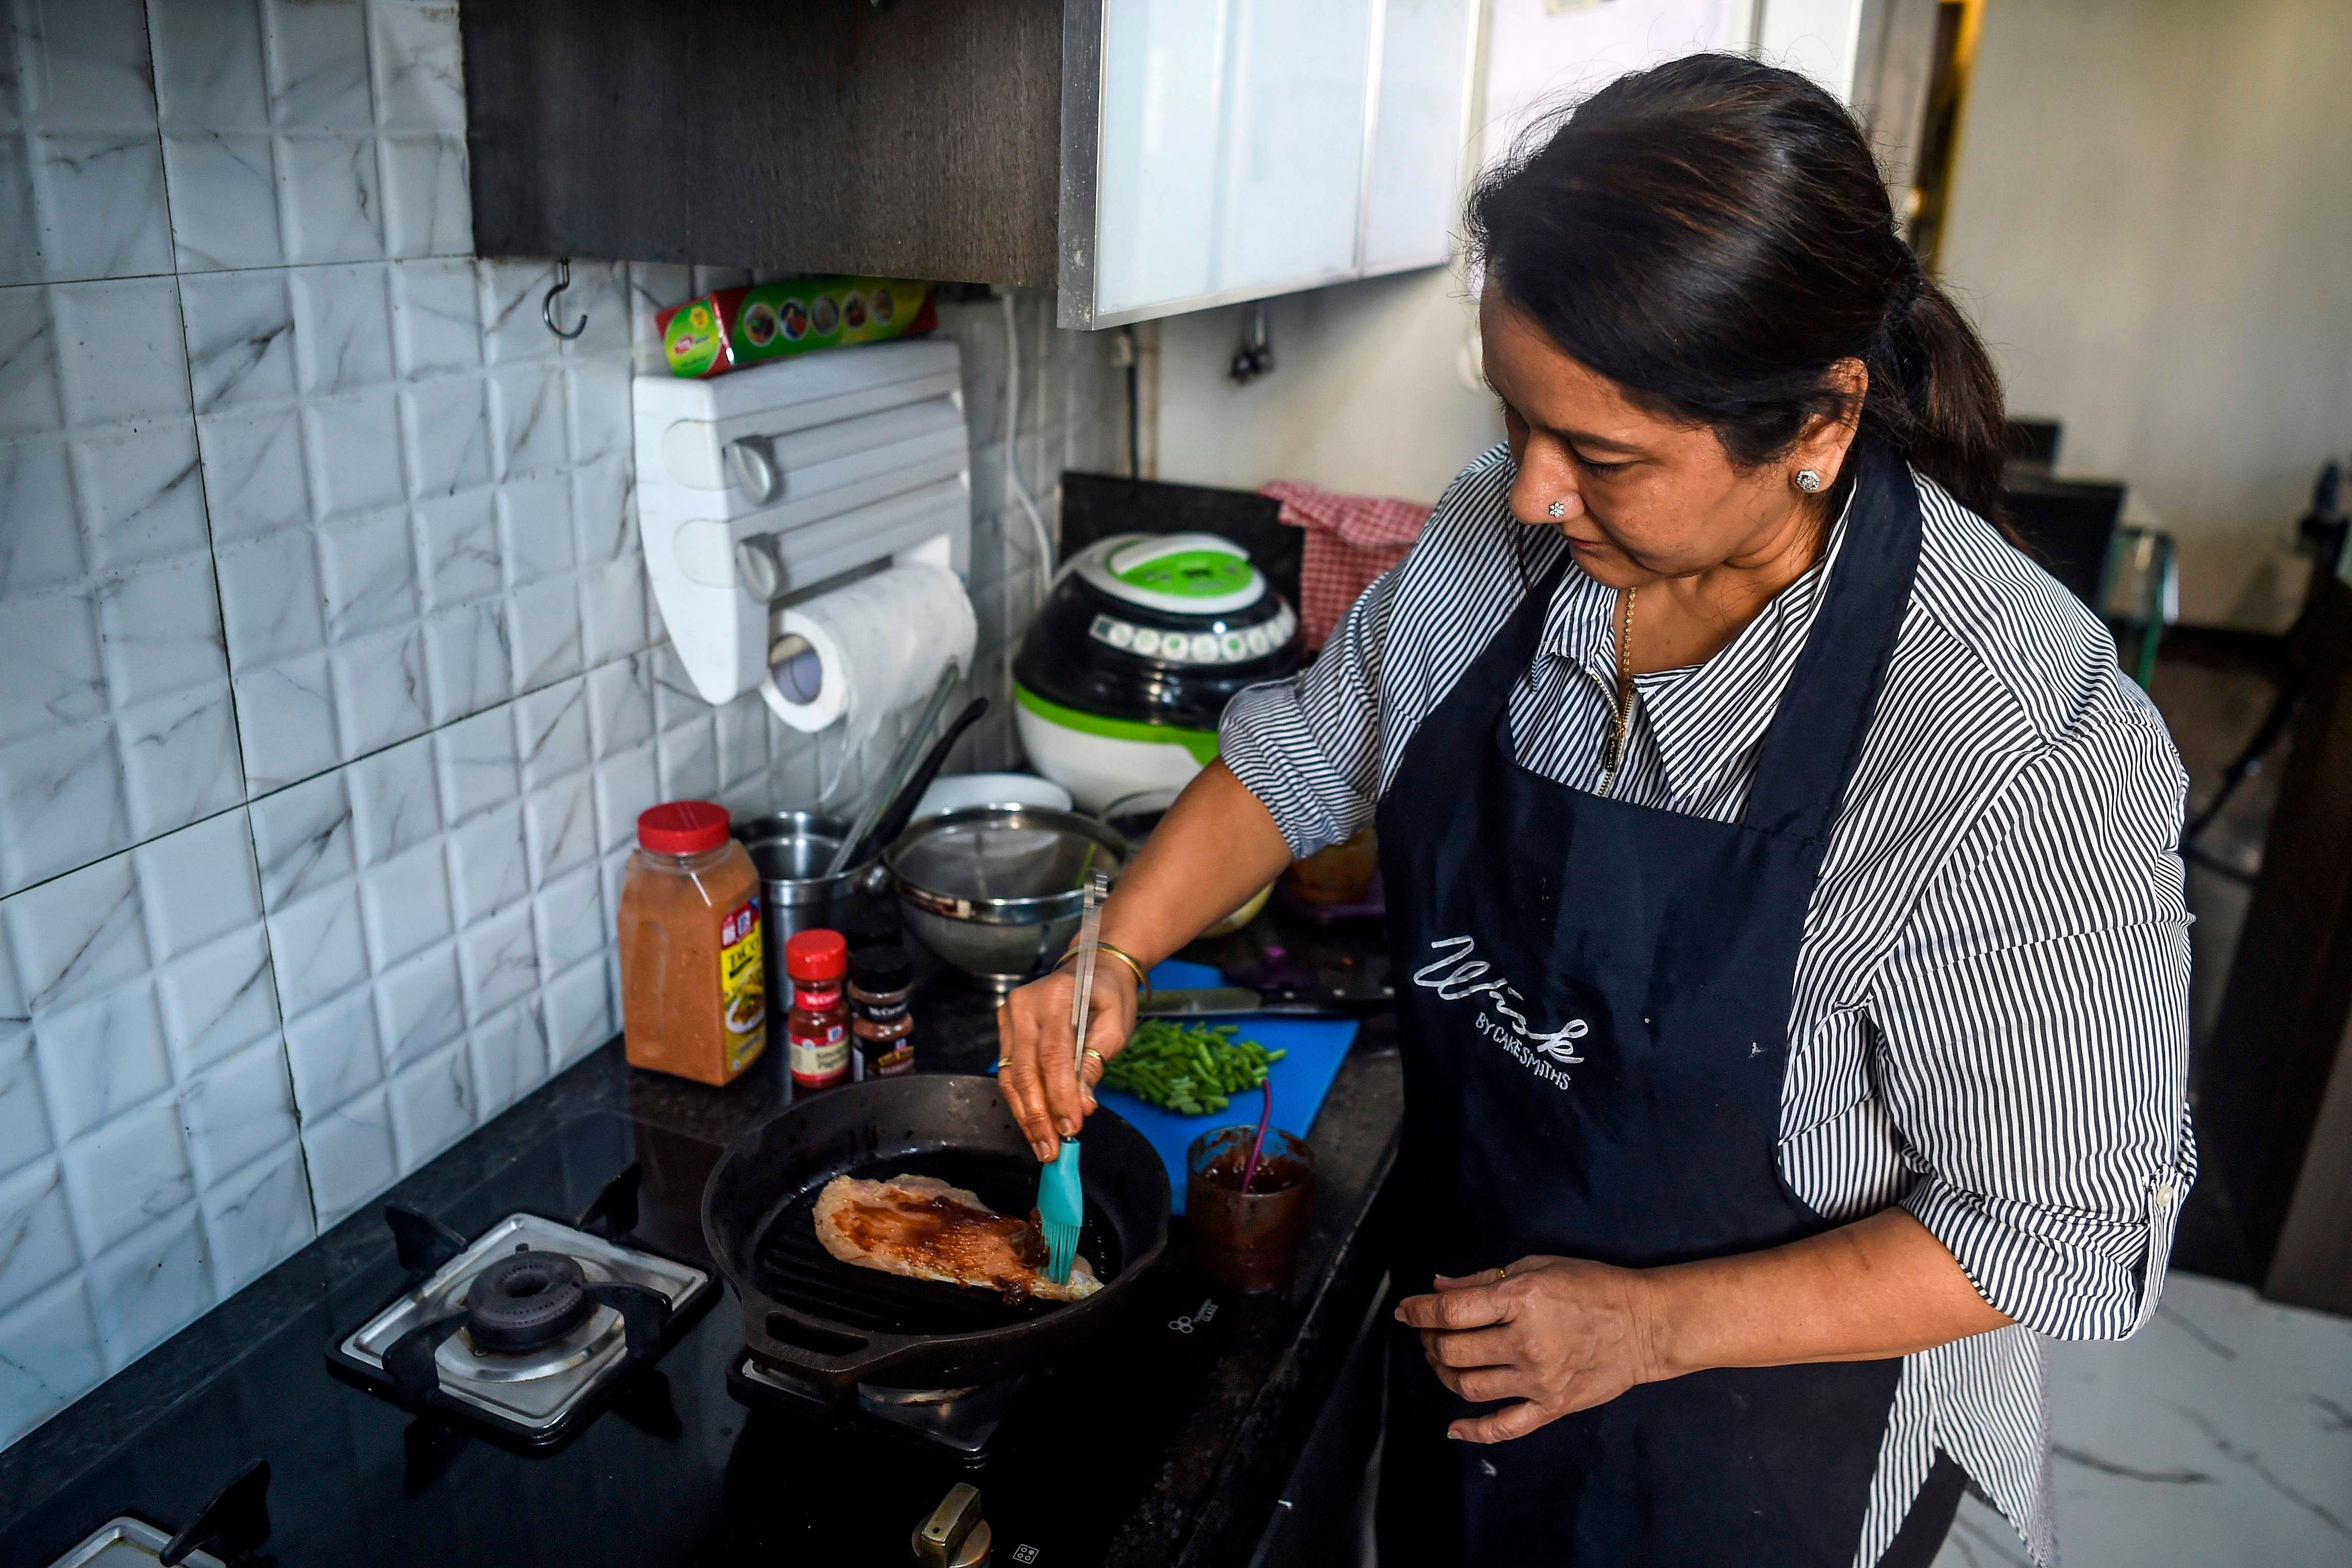 Rashmi Sahijwala never expected to start working at the age of 59, let alone join India's gig economy -- now she is part of an army of housewives turning their homes into "cloud kitchens" to feed time-starved millennials.. (AFP Photo)